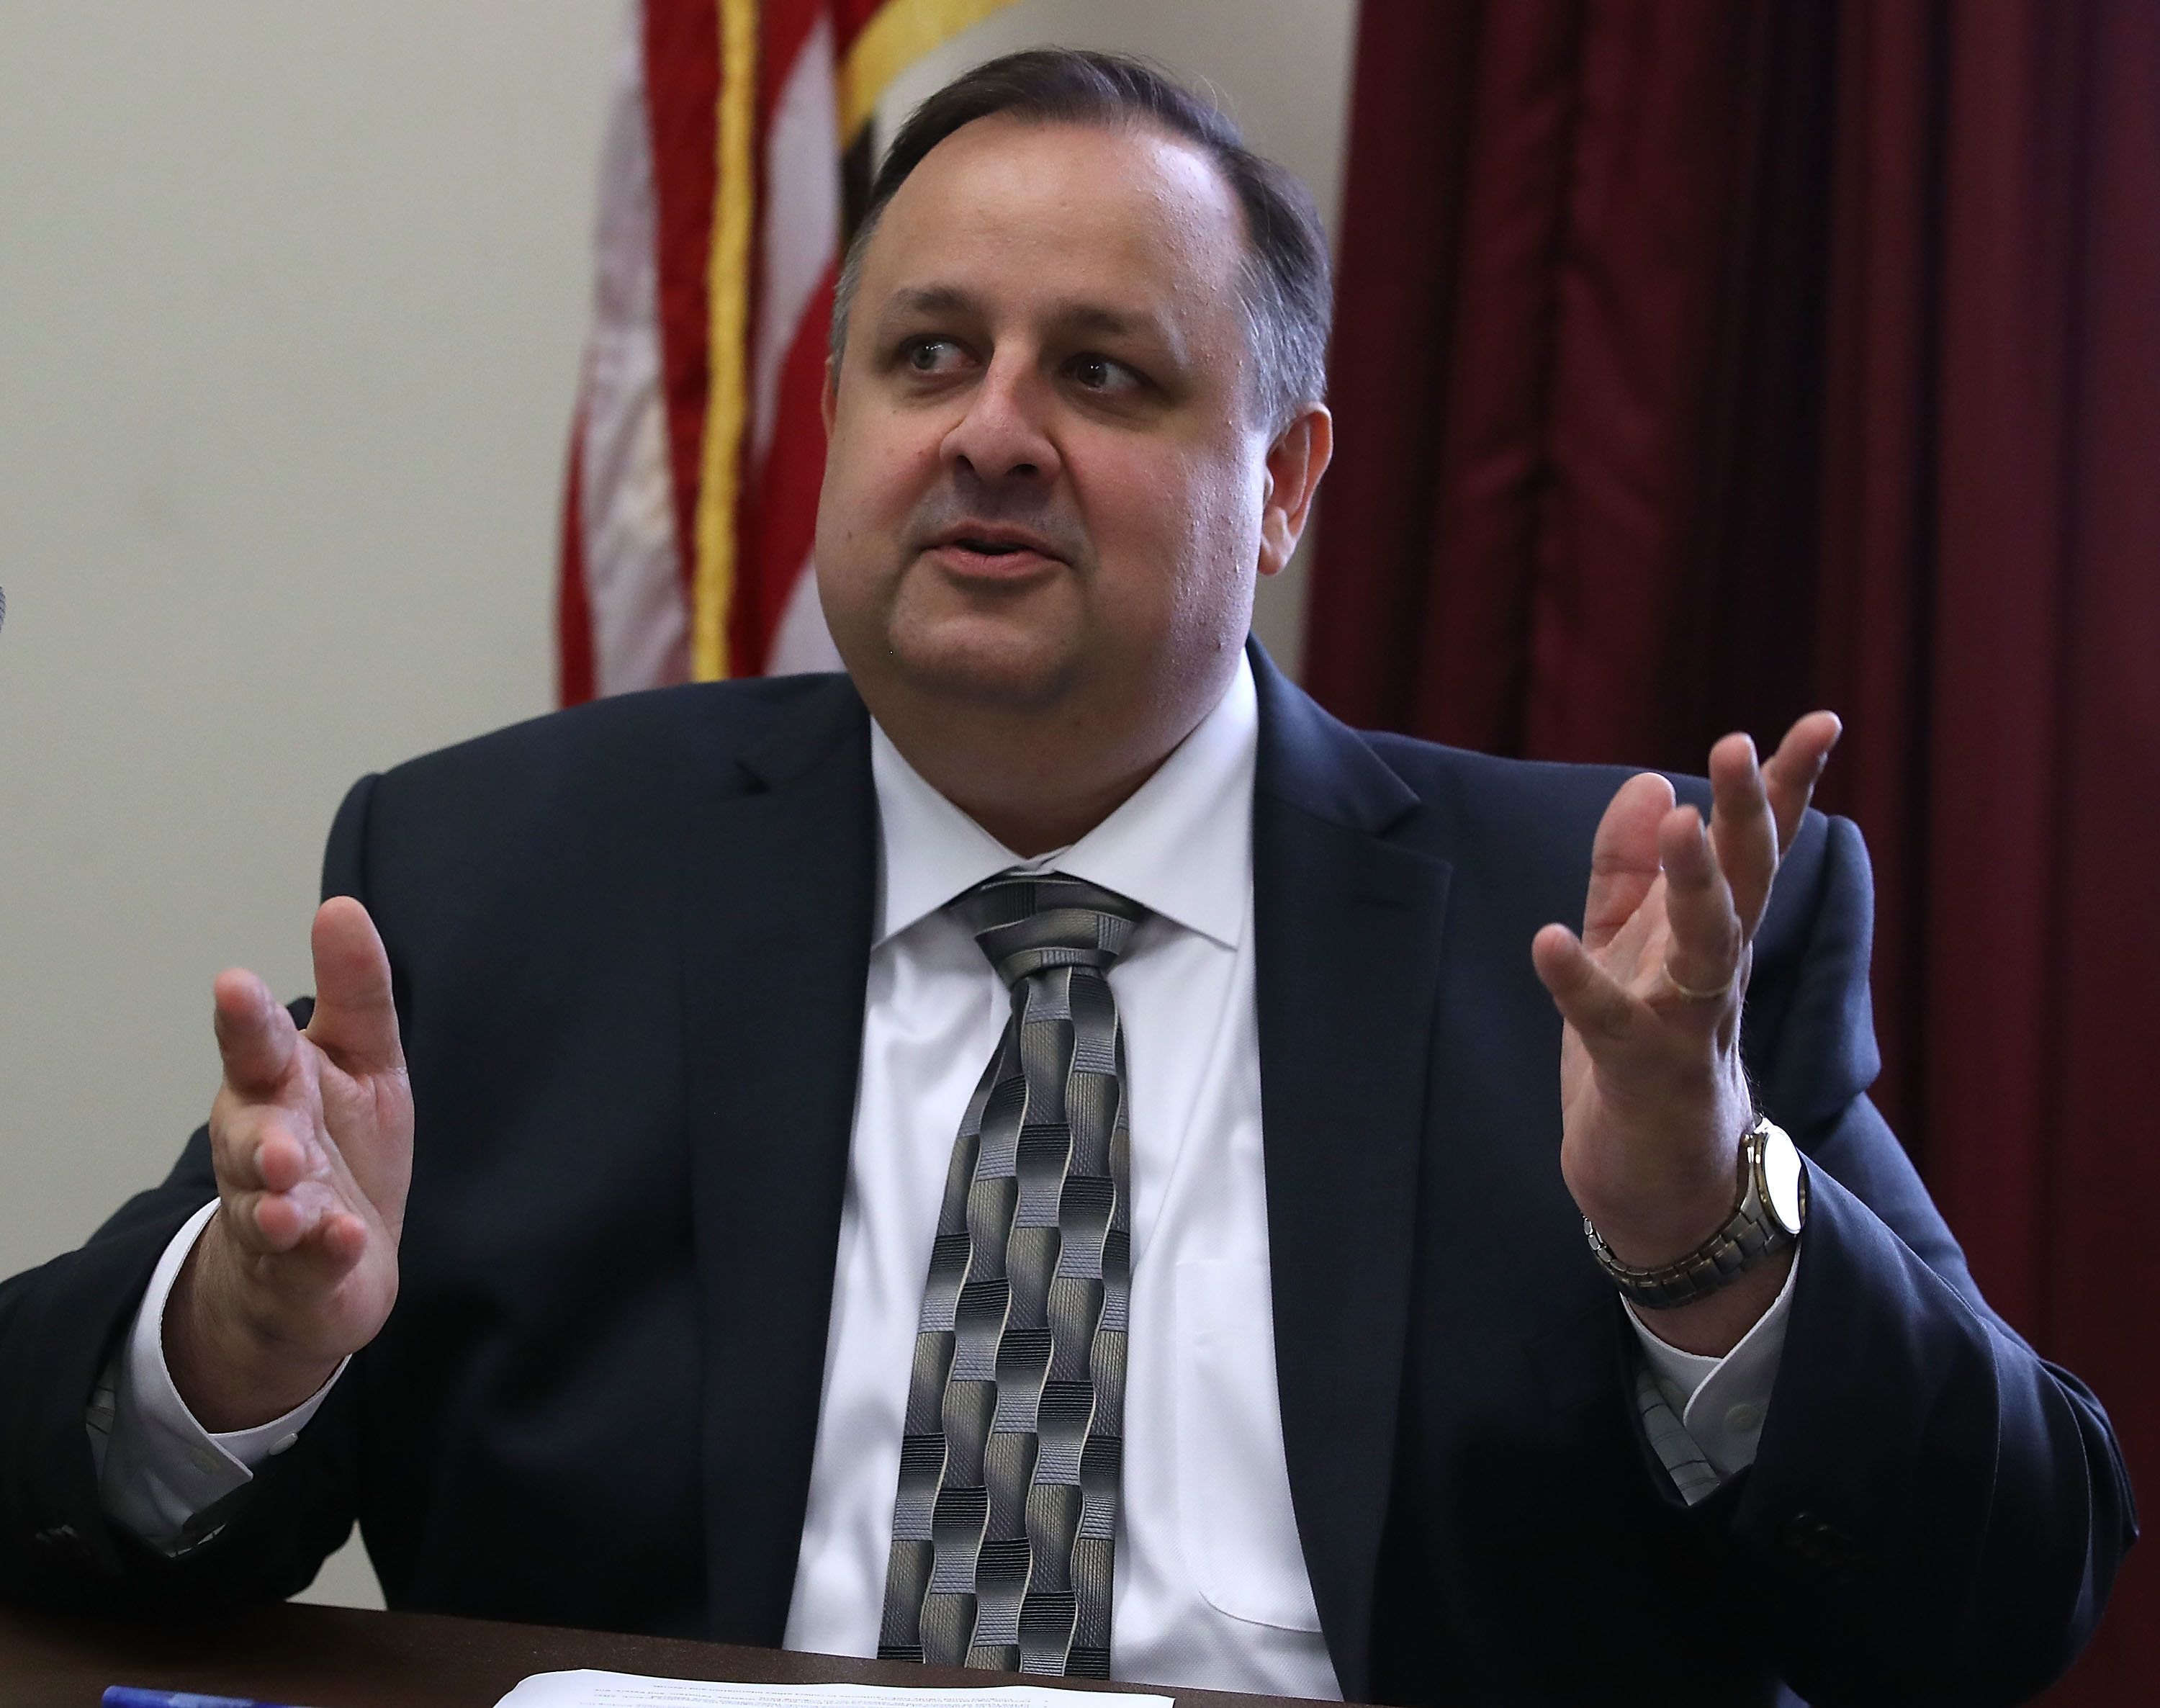 Ex-Ethics Chief Shaub Gives Republicans A Much-Needed Lesson About Democracy